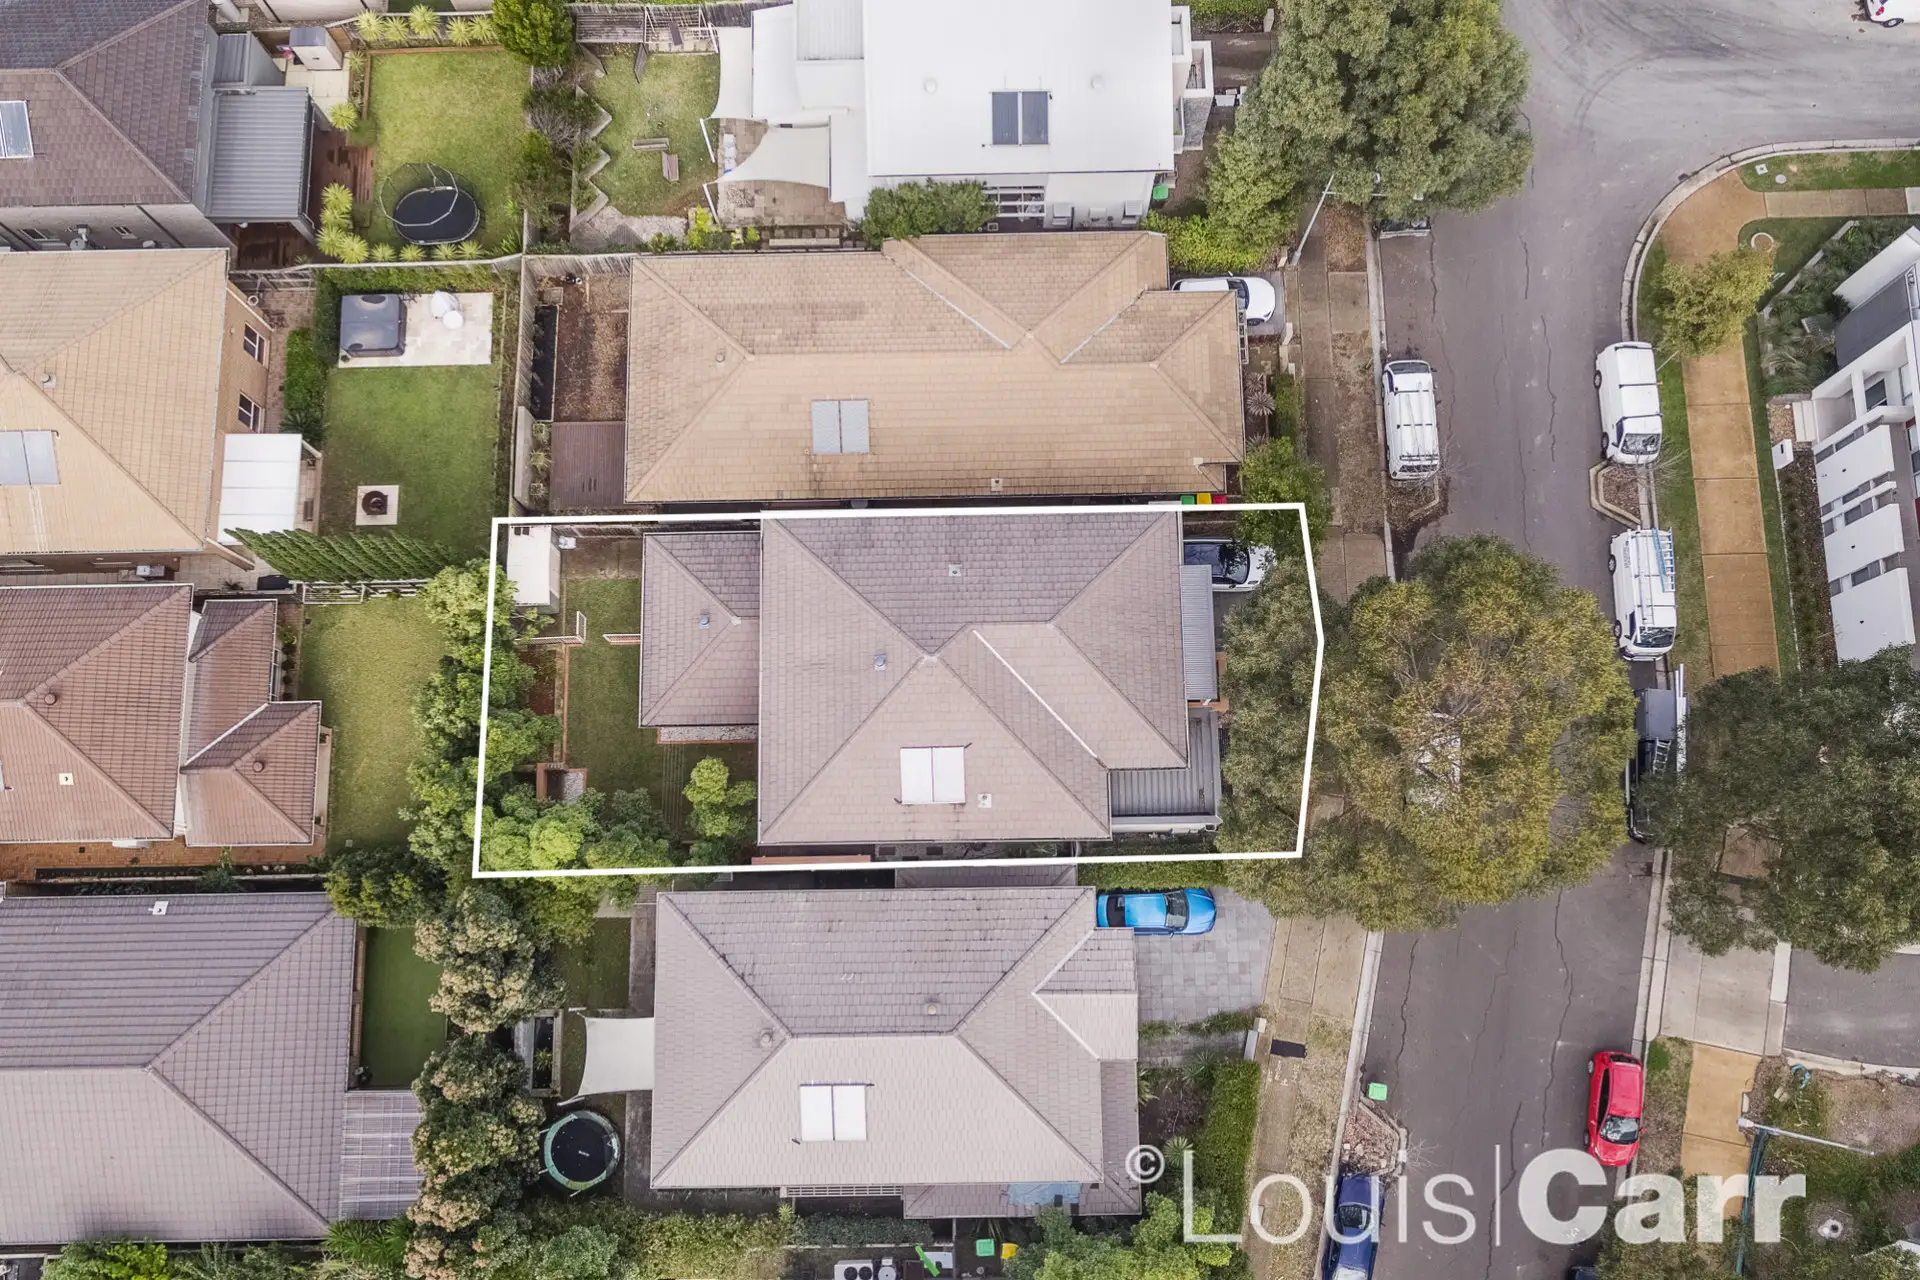 Photo #13: 15 Bellcast Road, Rouse Hill - Sold by Louis Carr Real Estate